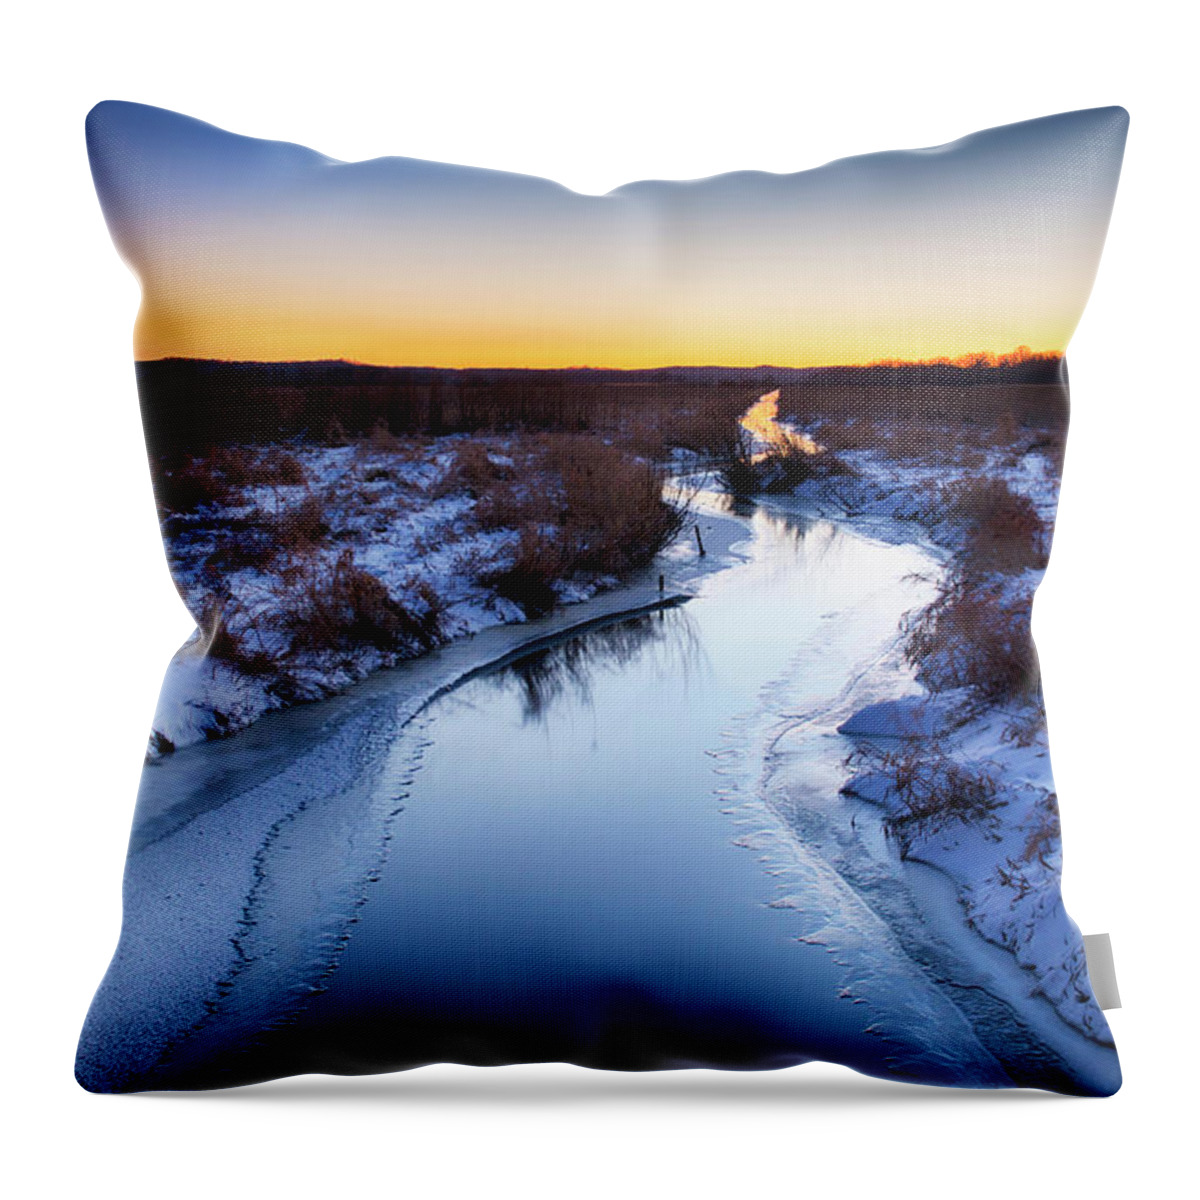  Throw Pillow featuring the photograph Scuppernong by Dan Hefle